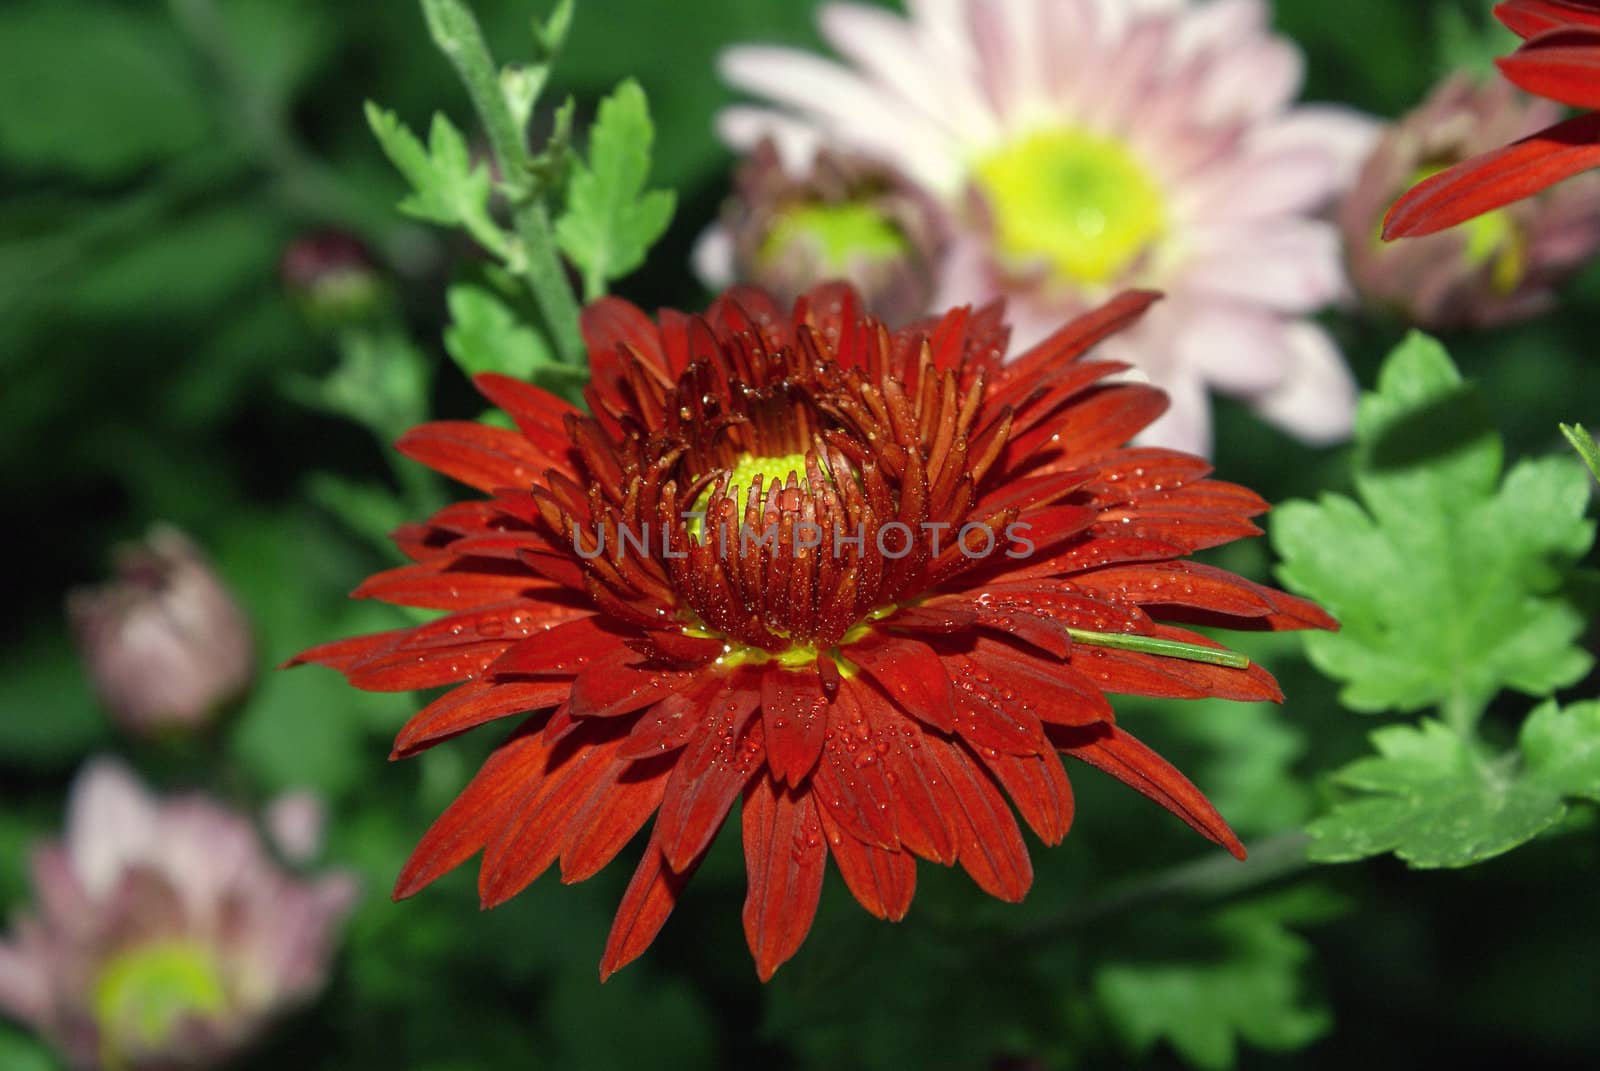 Closeup shot of a red chrysanthemum covered with water drops.